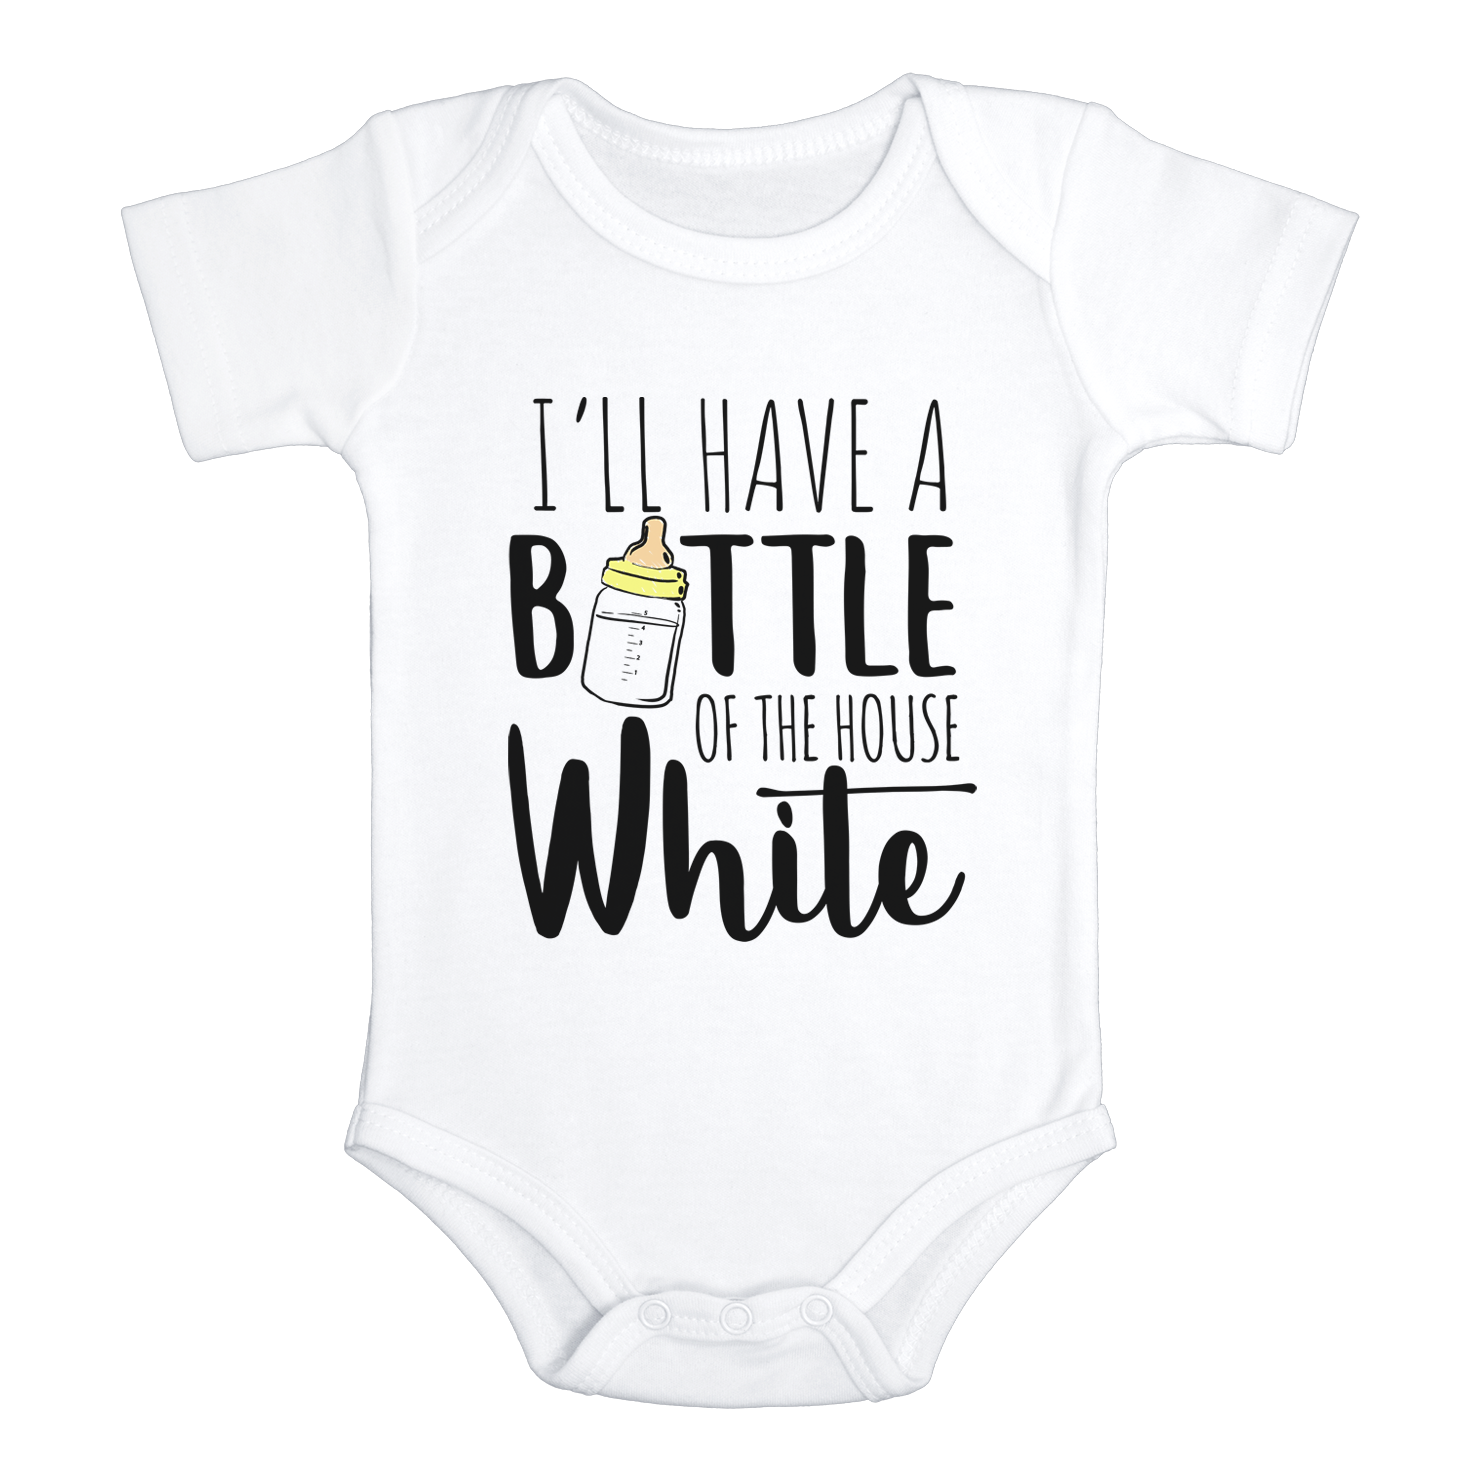 I'LL HAVE A BOTTLE OF THE HOUSE WHITE Funny Baby Bodysuit Cute Milk Onesie White - HappyAddition